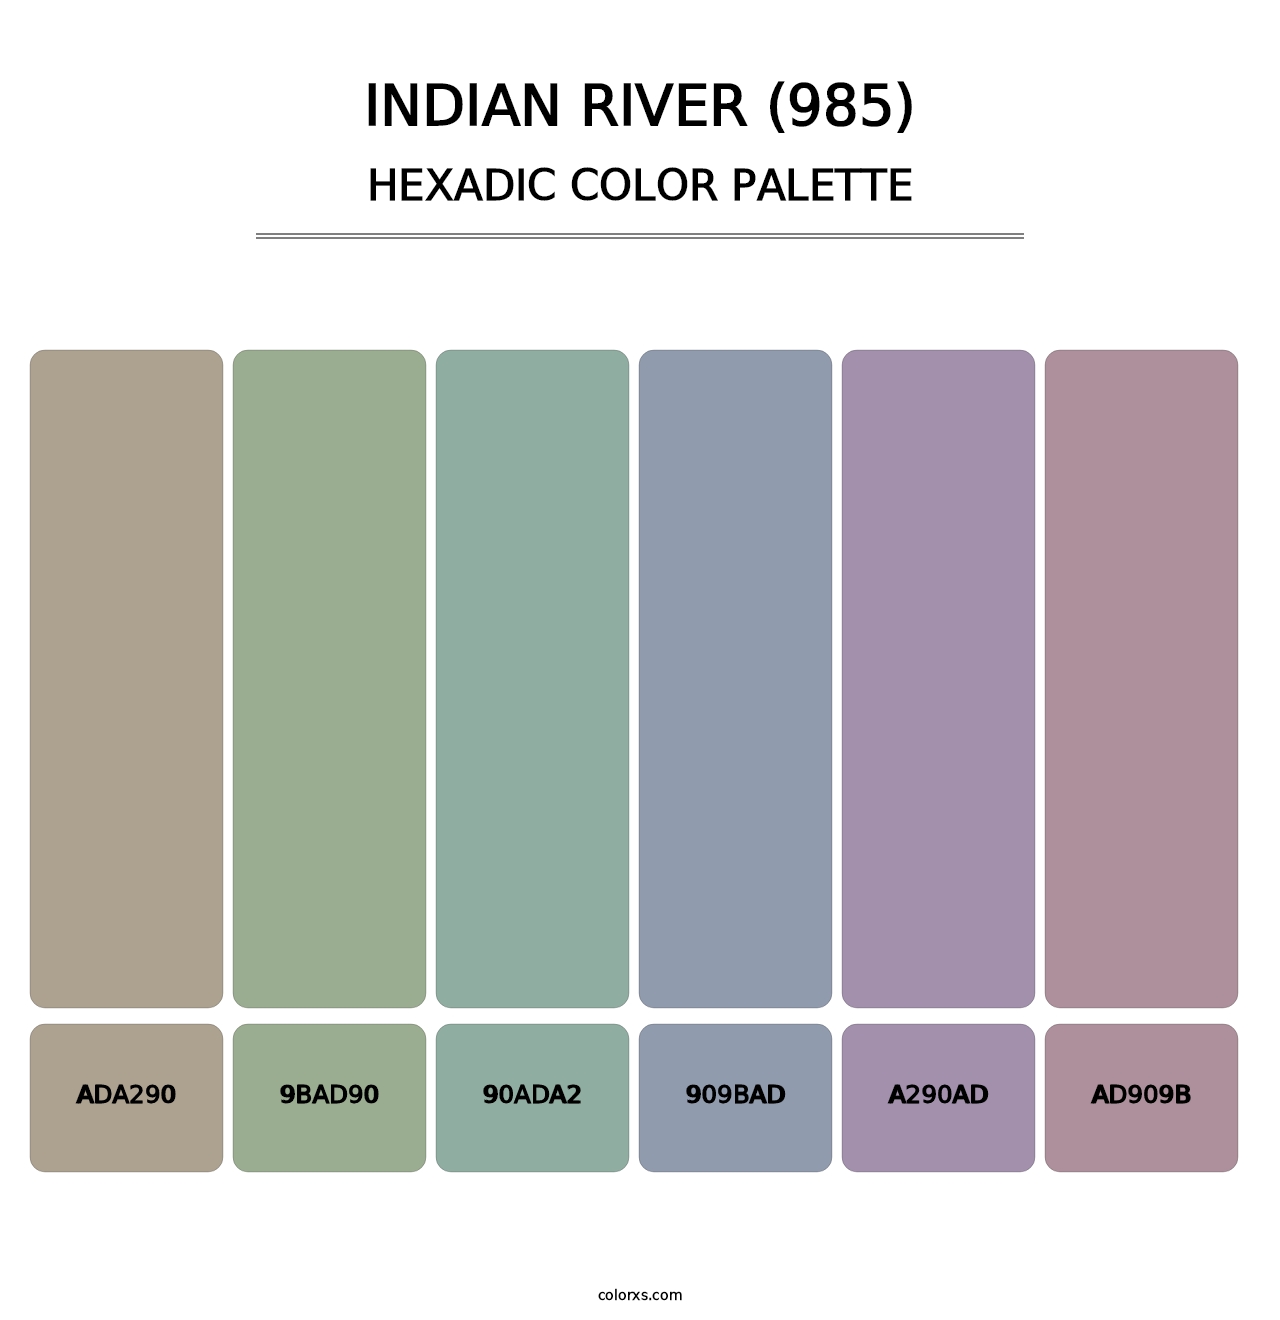 Indian River (985) - Hexadic Color Palette